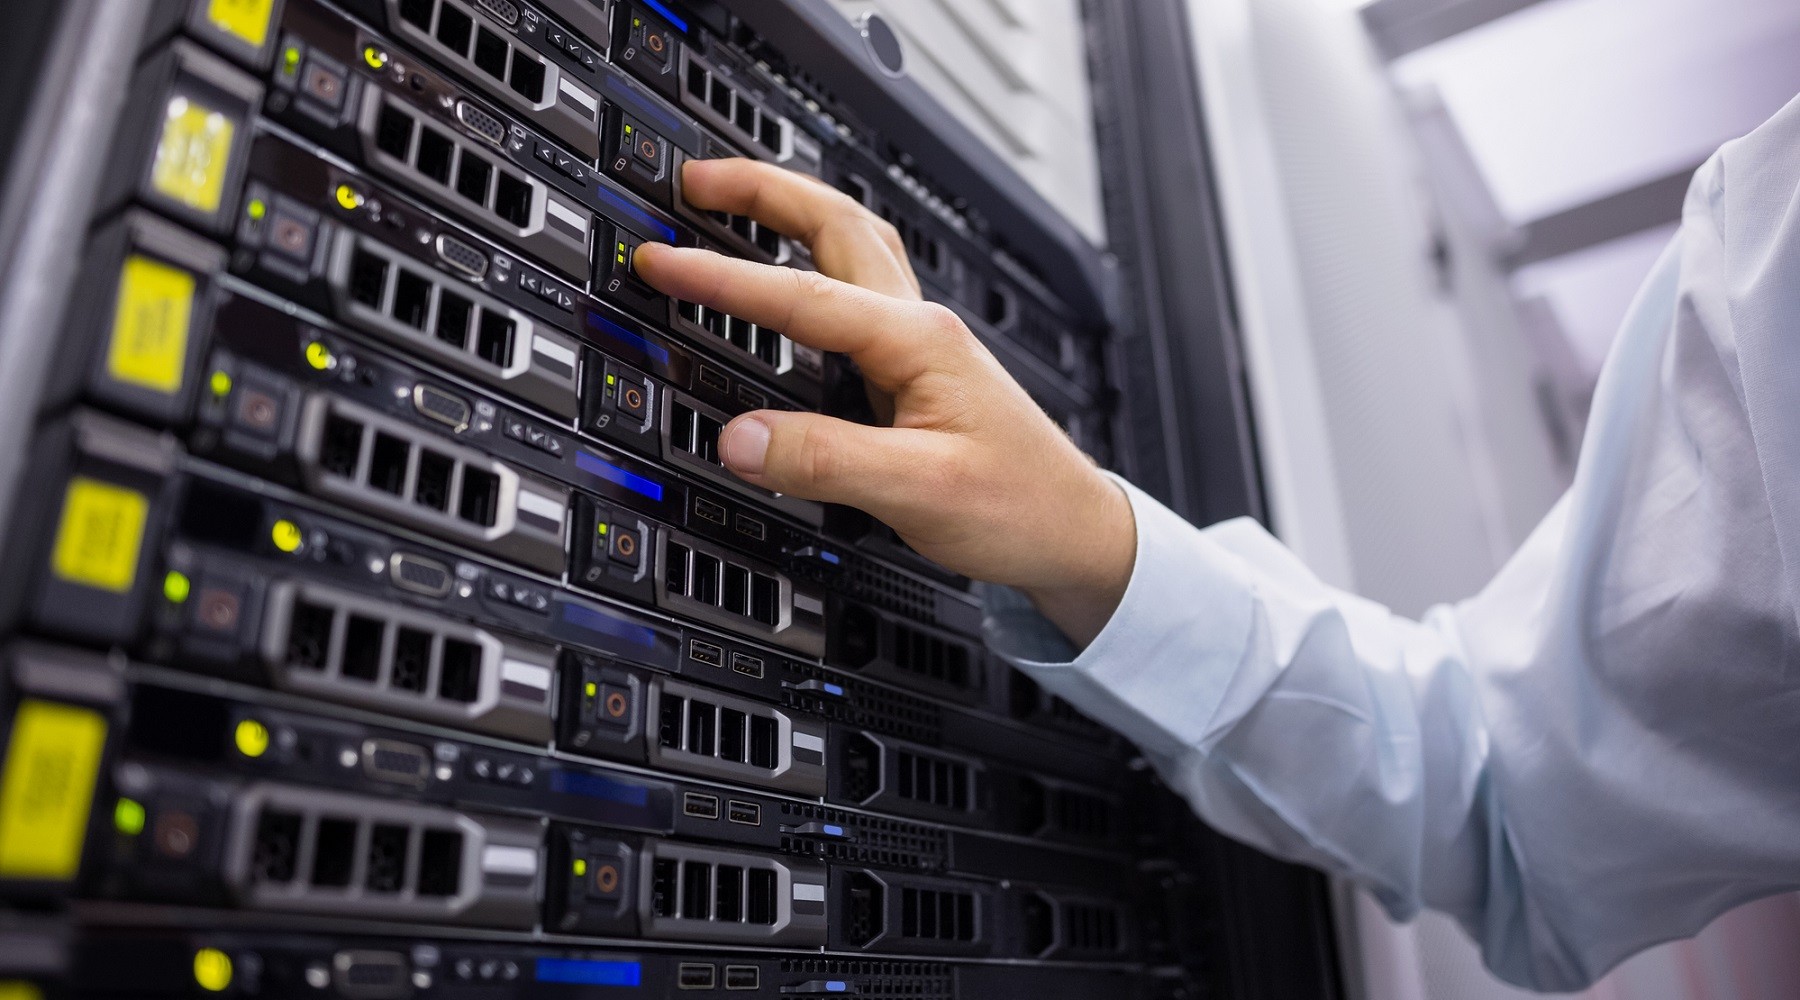 Our Experience: How to Build a Company Data Center? Part Two